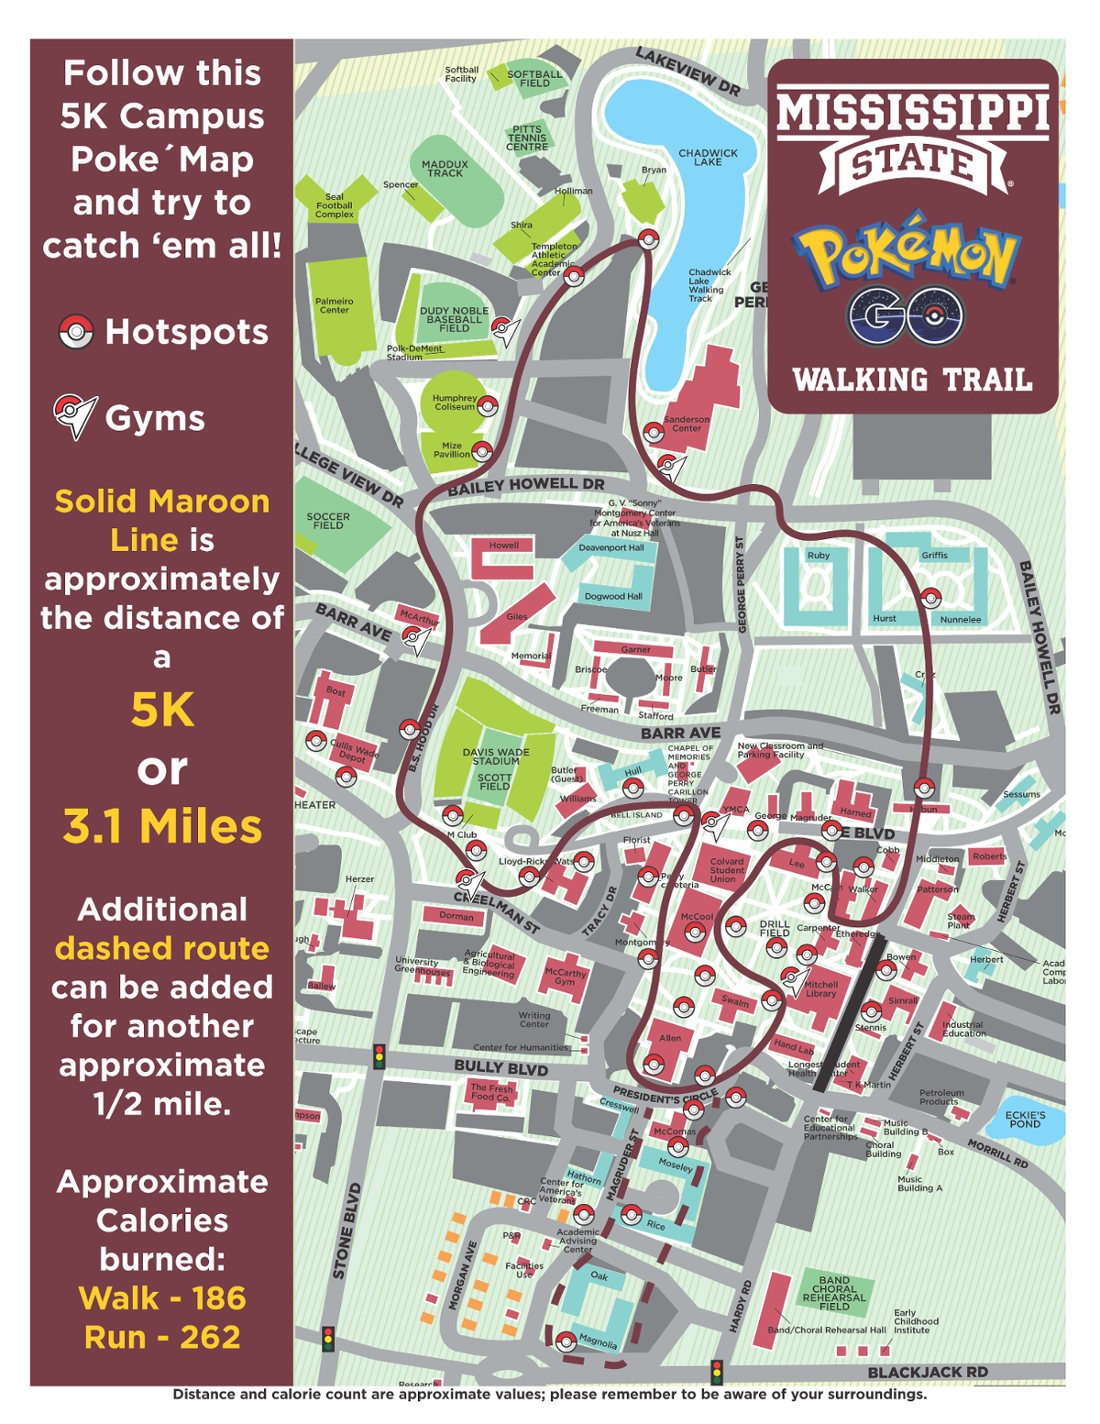 Safety Paramount For Pokemon Go Players On Campus Mississippi